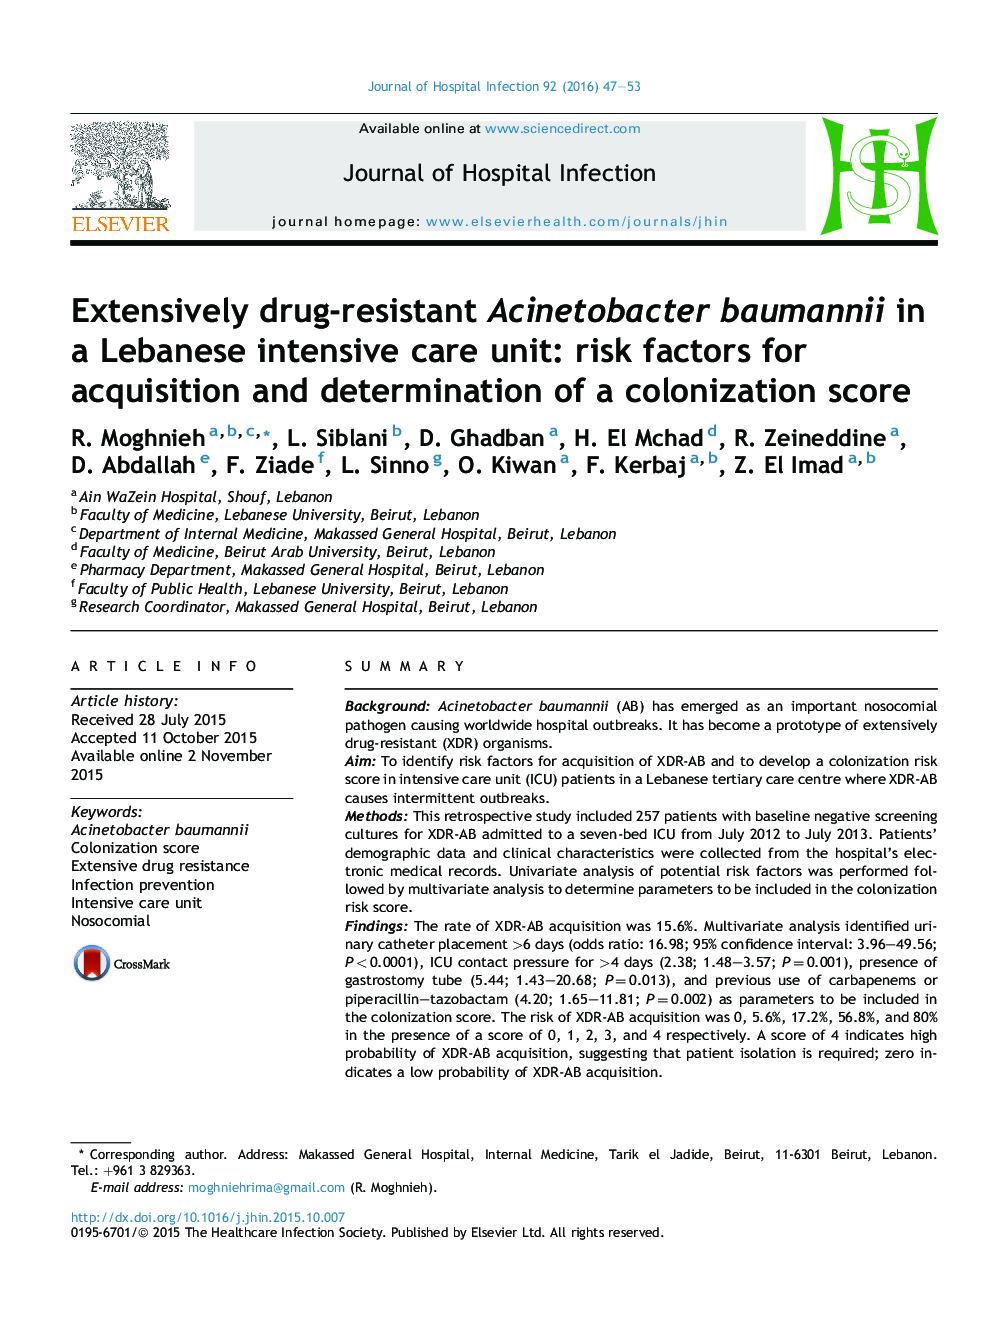 Extensively drug-resistant Acinetobacter baumannii in a Lebanese intensive care unit: risk factors for acquisition and determination of a colonization score